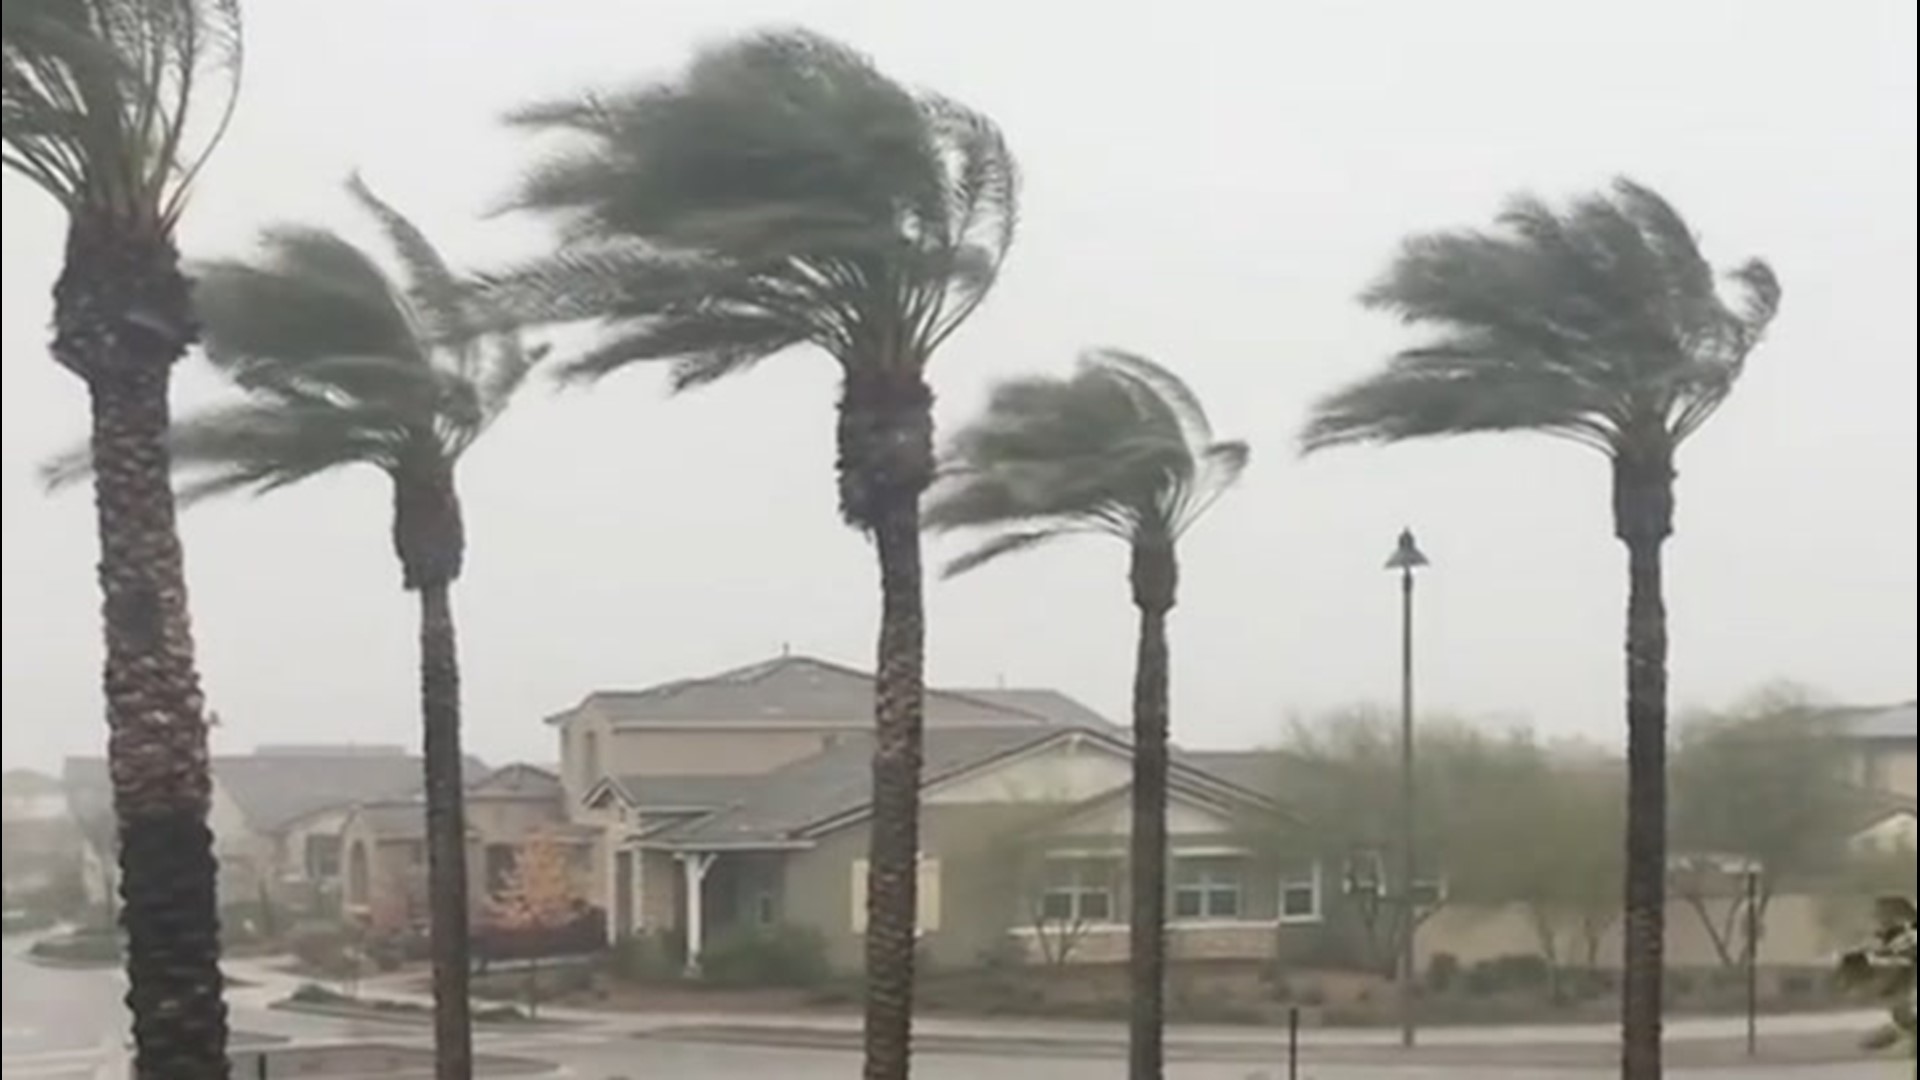 Gusty winds and hail came to parts of Arizona on Jan. 25 as a storm system continued its path through the Southwest.